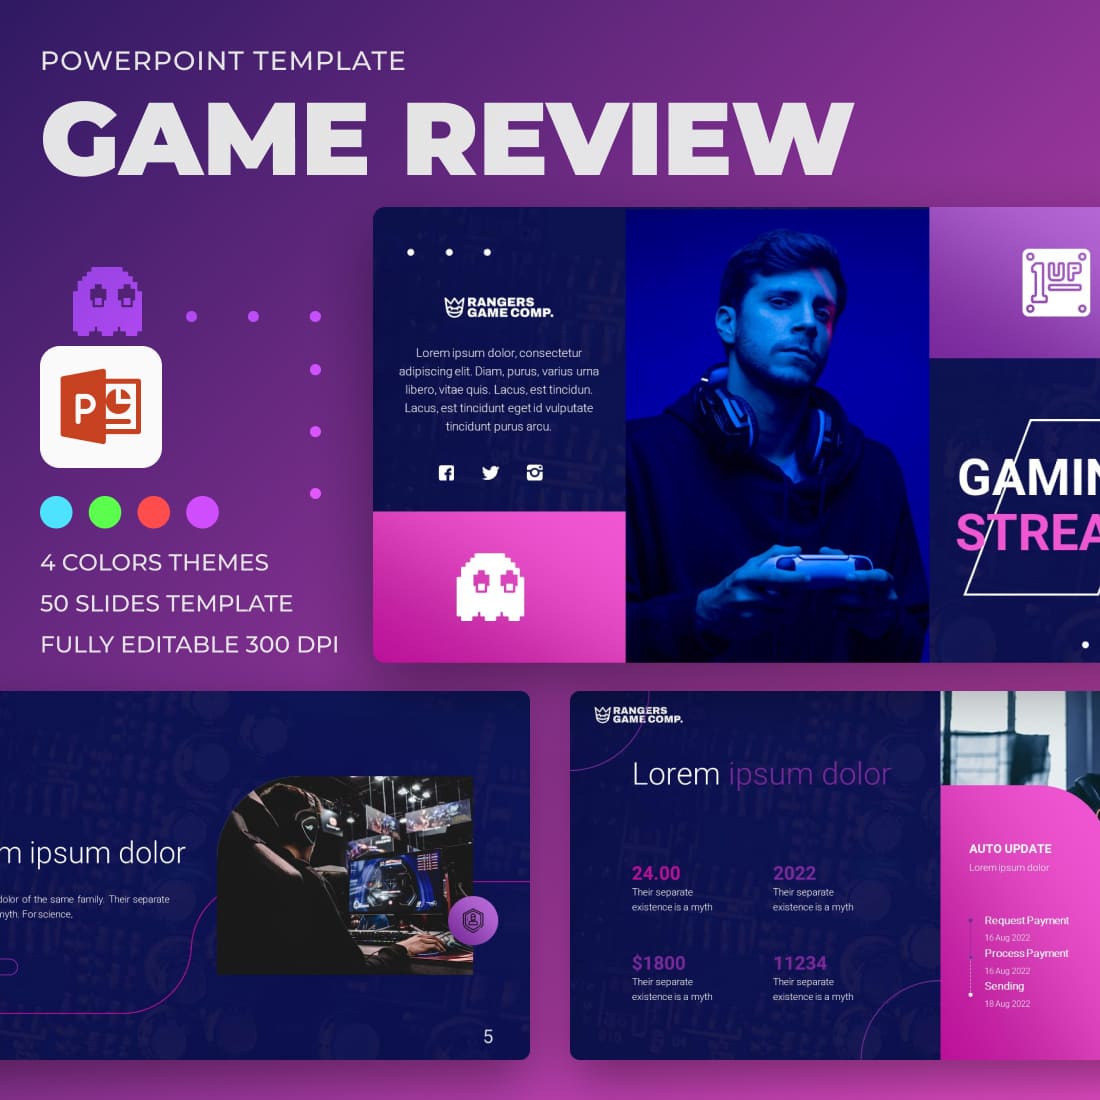 Gaming Stream Powerpoint Template.